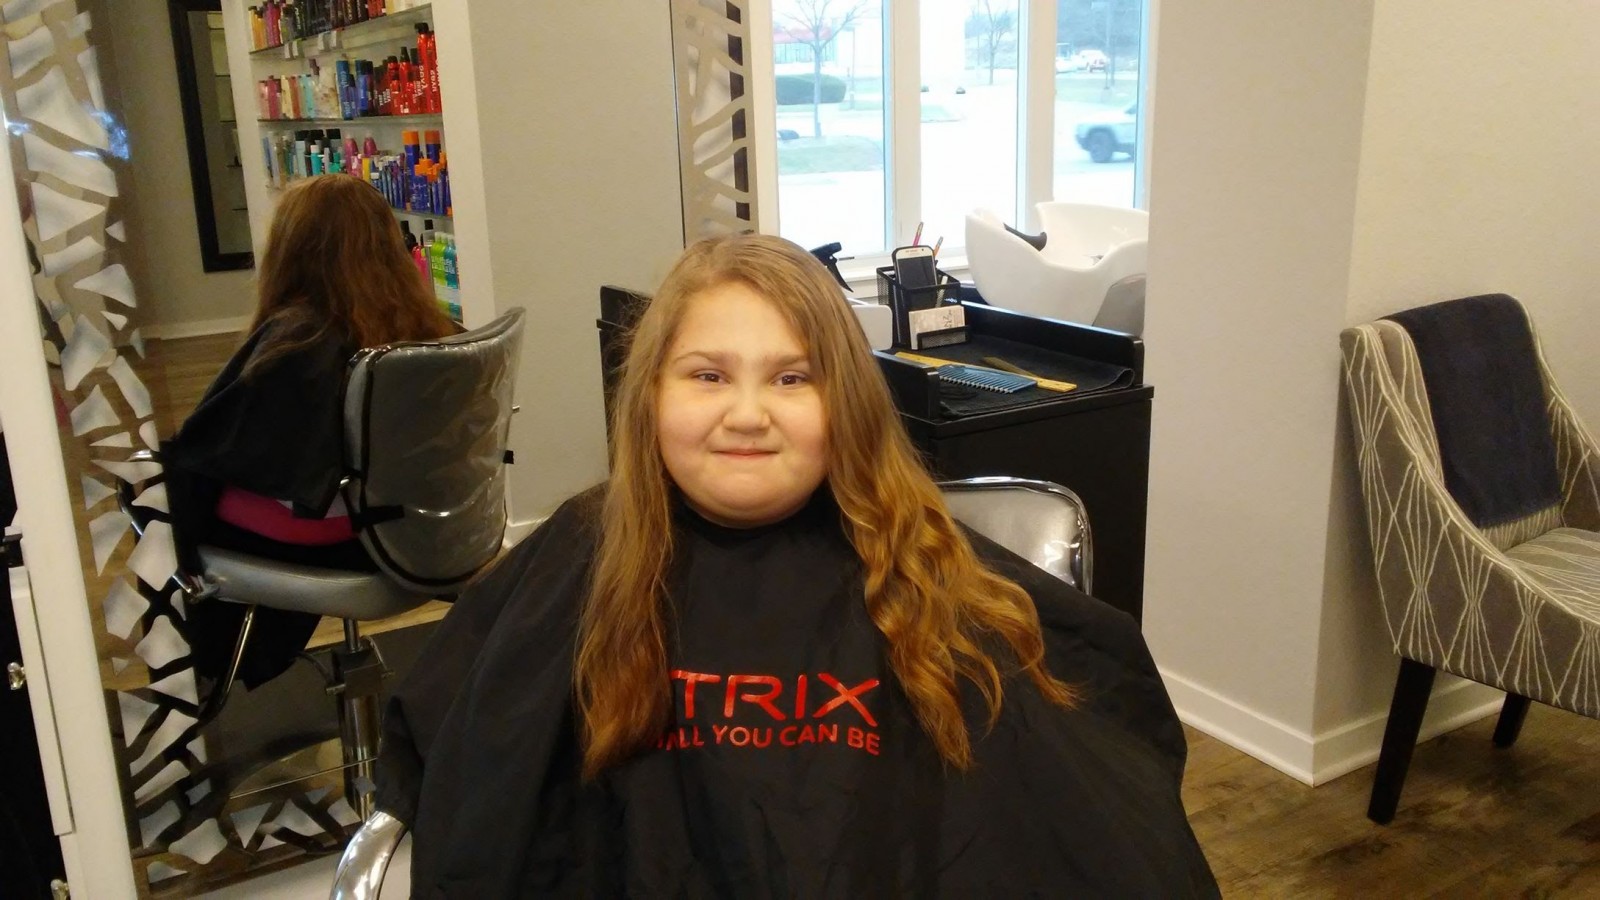 Donating her hair